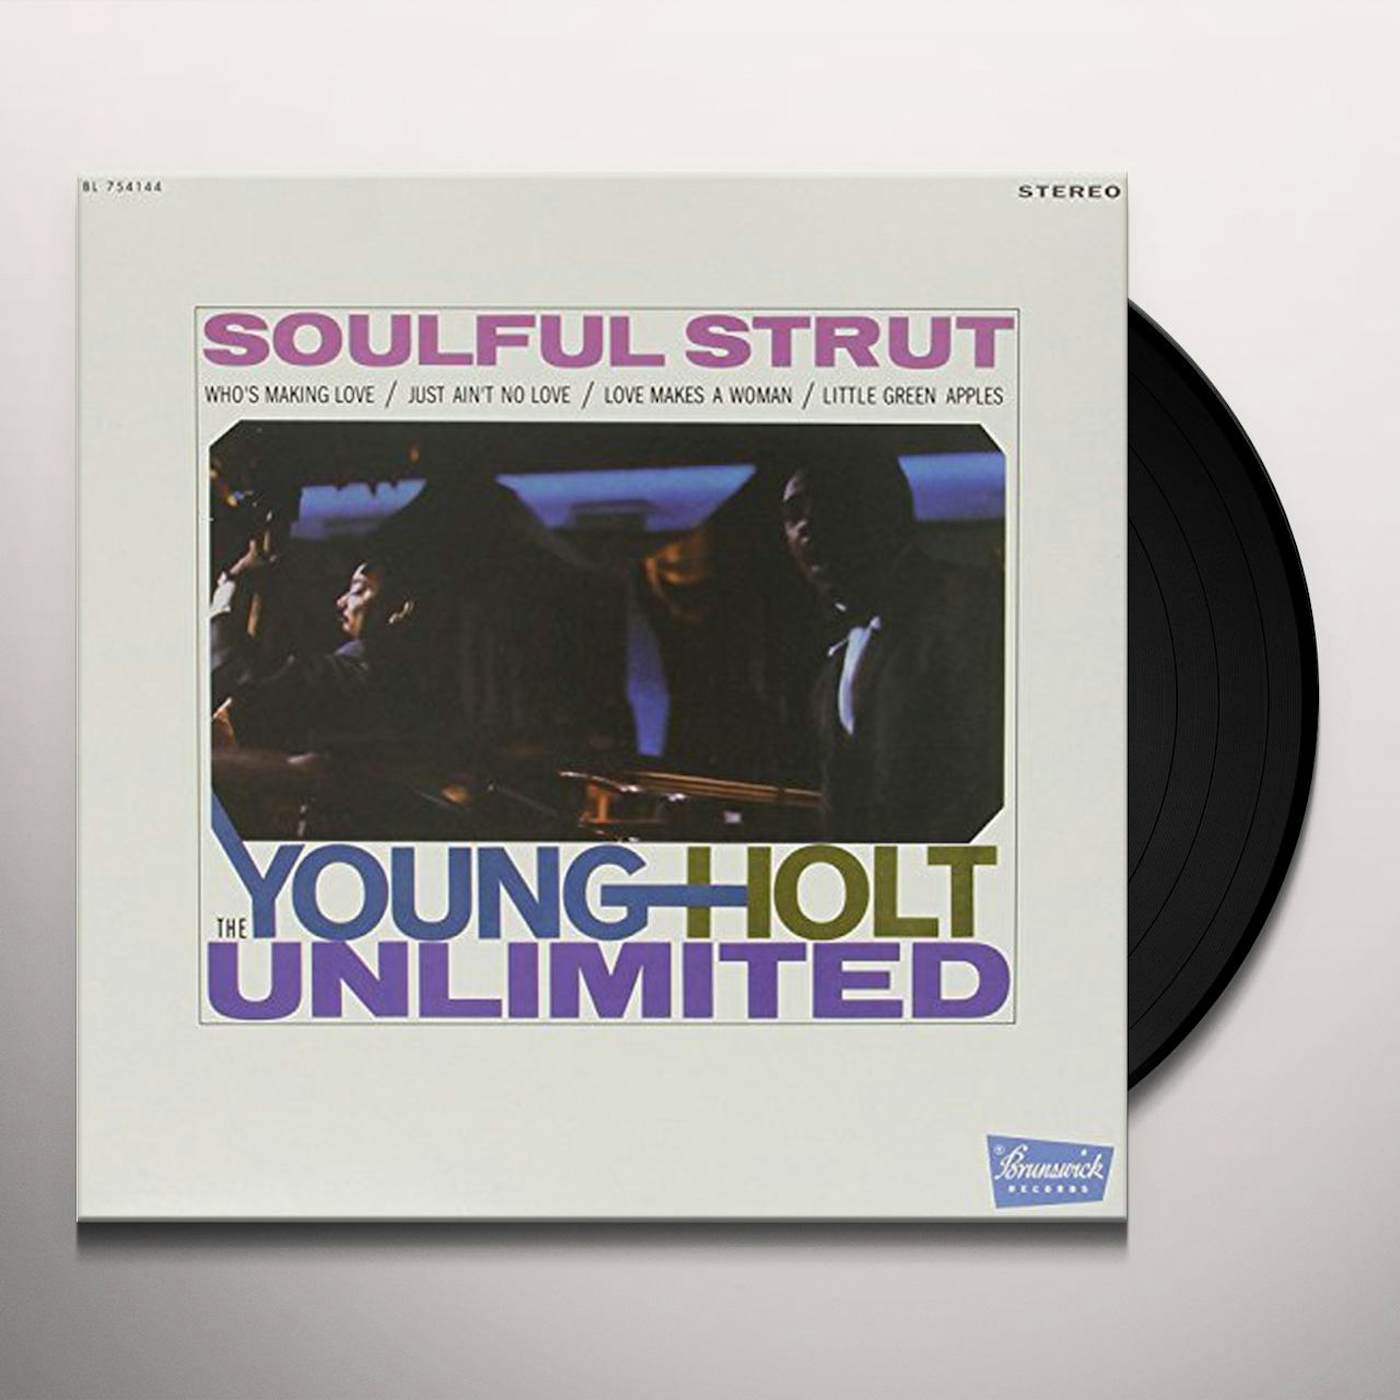 Young-Holt Unlimited Soulful Strut Vinyl Record